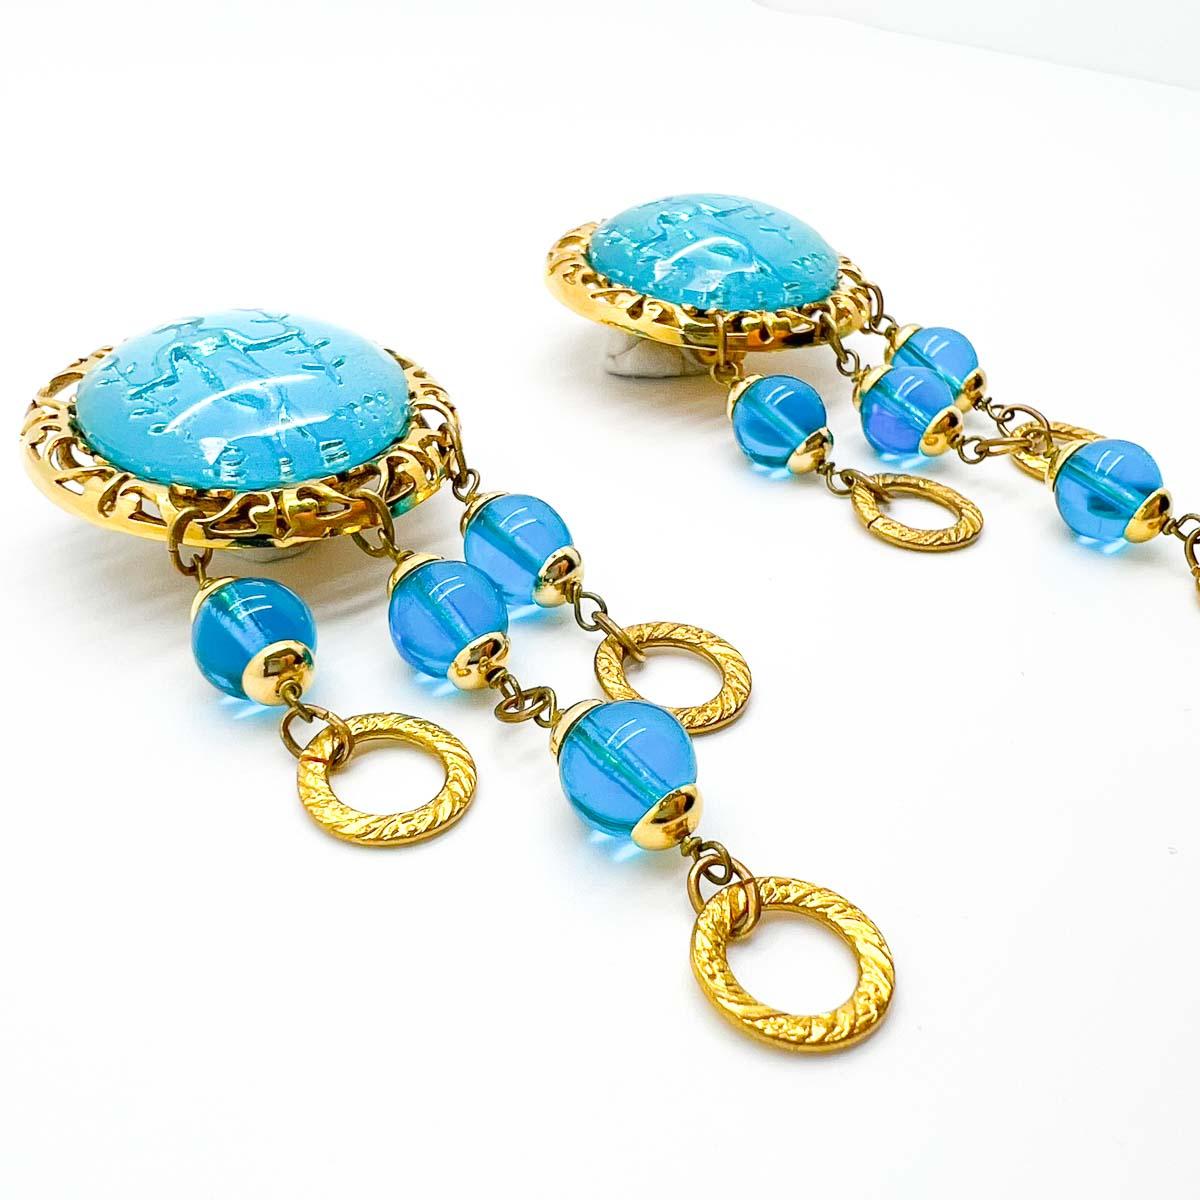 Vintage French Intaglio Turquoise Drop Earrings 1970s 1